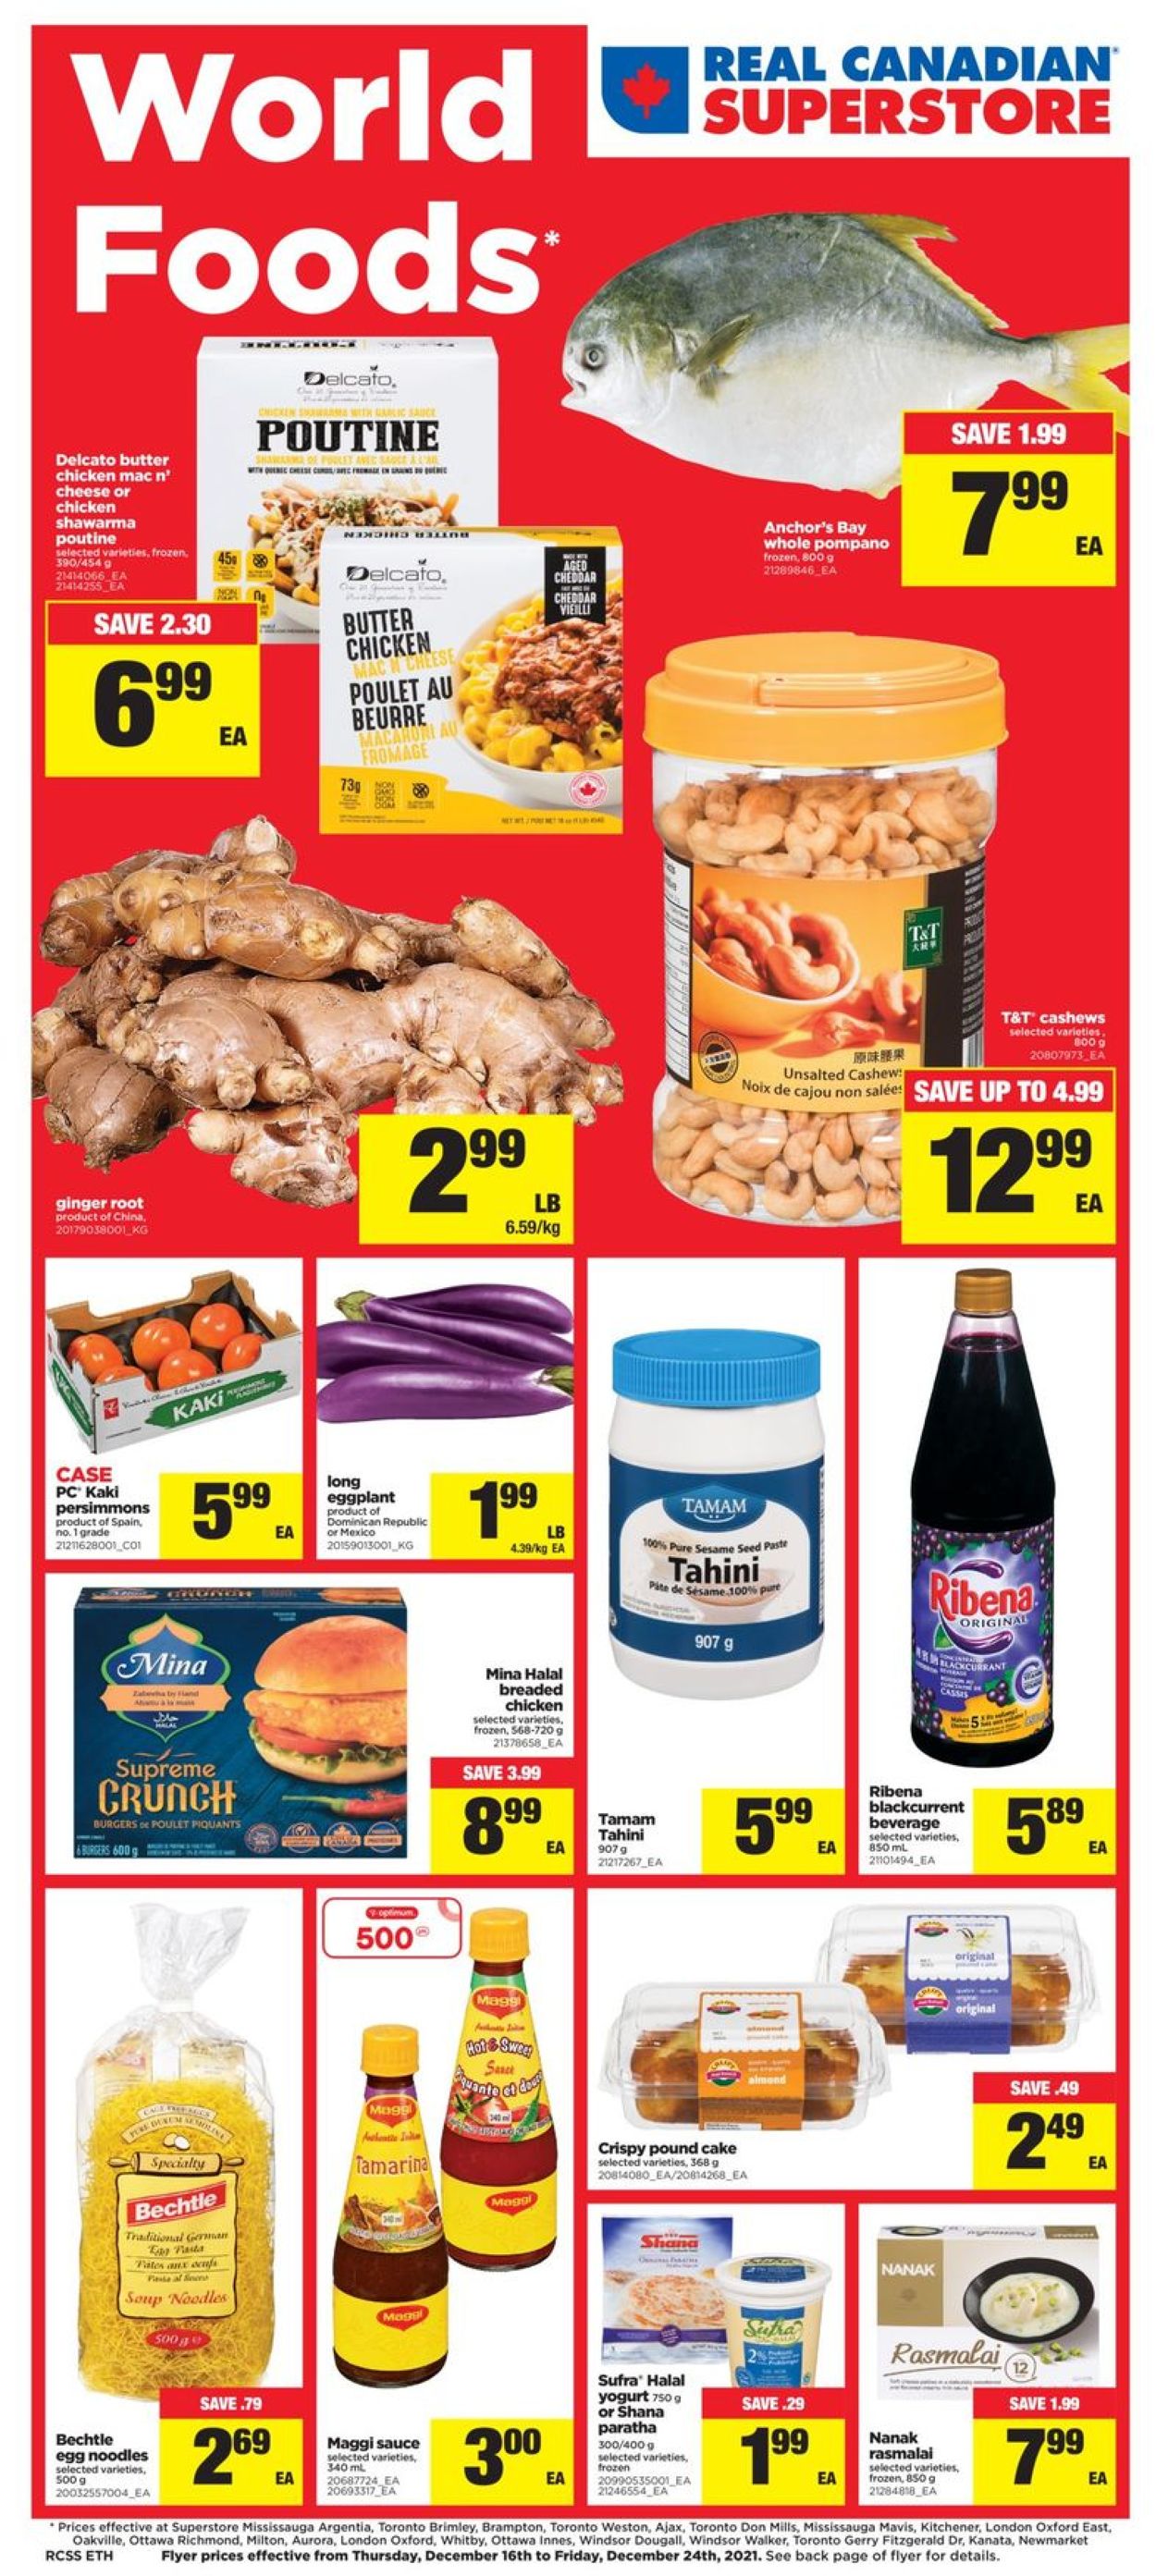 Real Canadian Superstore XMAS 2021 Flyer - 12/16-12/24/2021